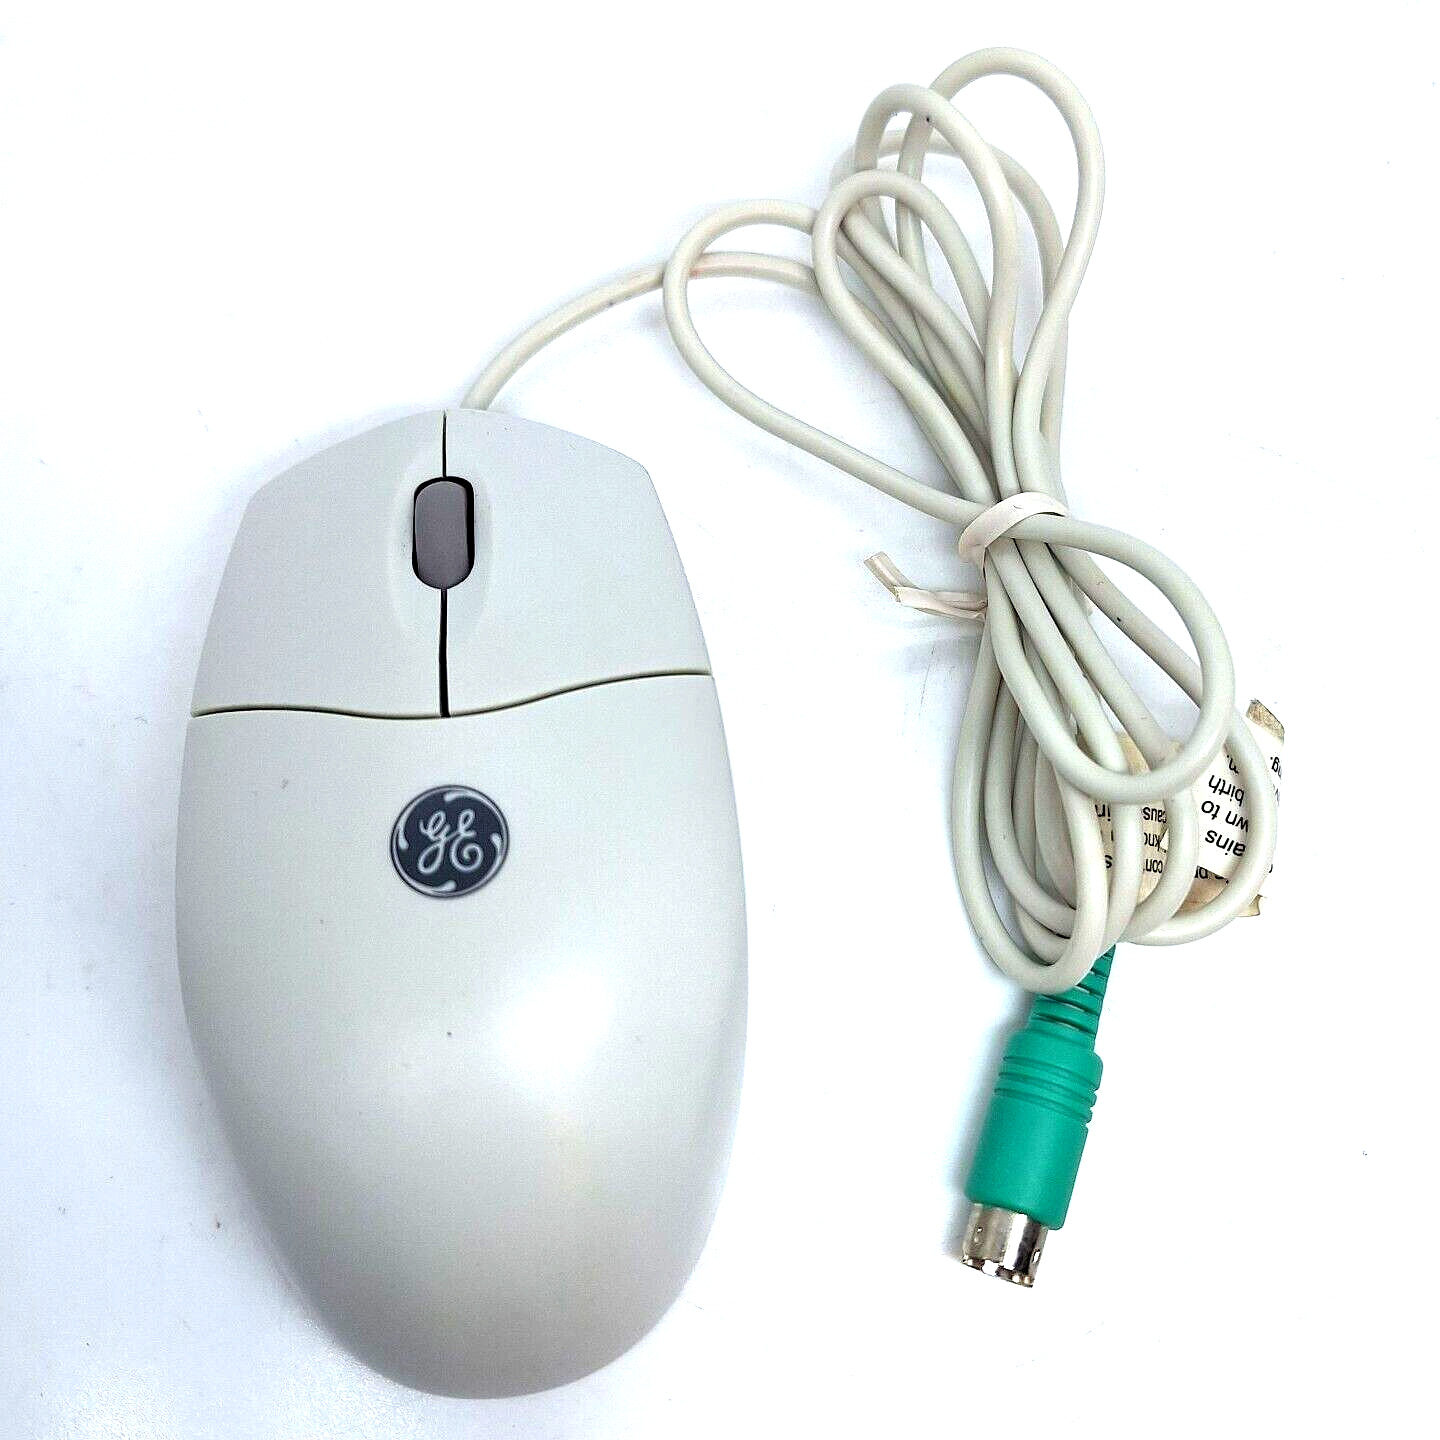 VTG Wired PS2 Ball Mouse White Cream Colored GE WK 1605